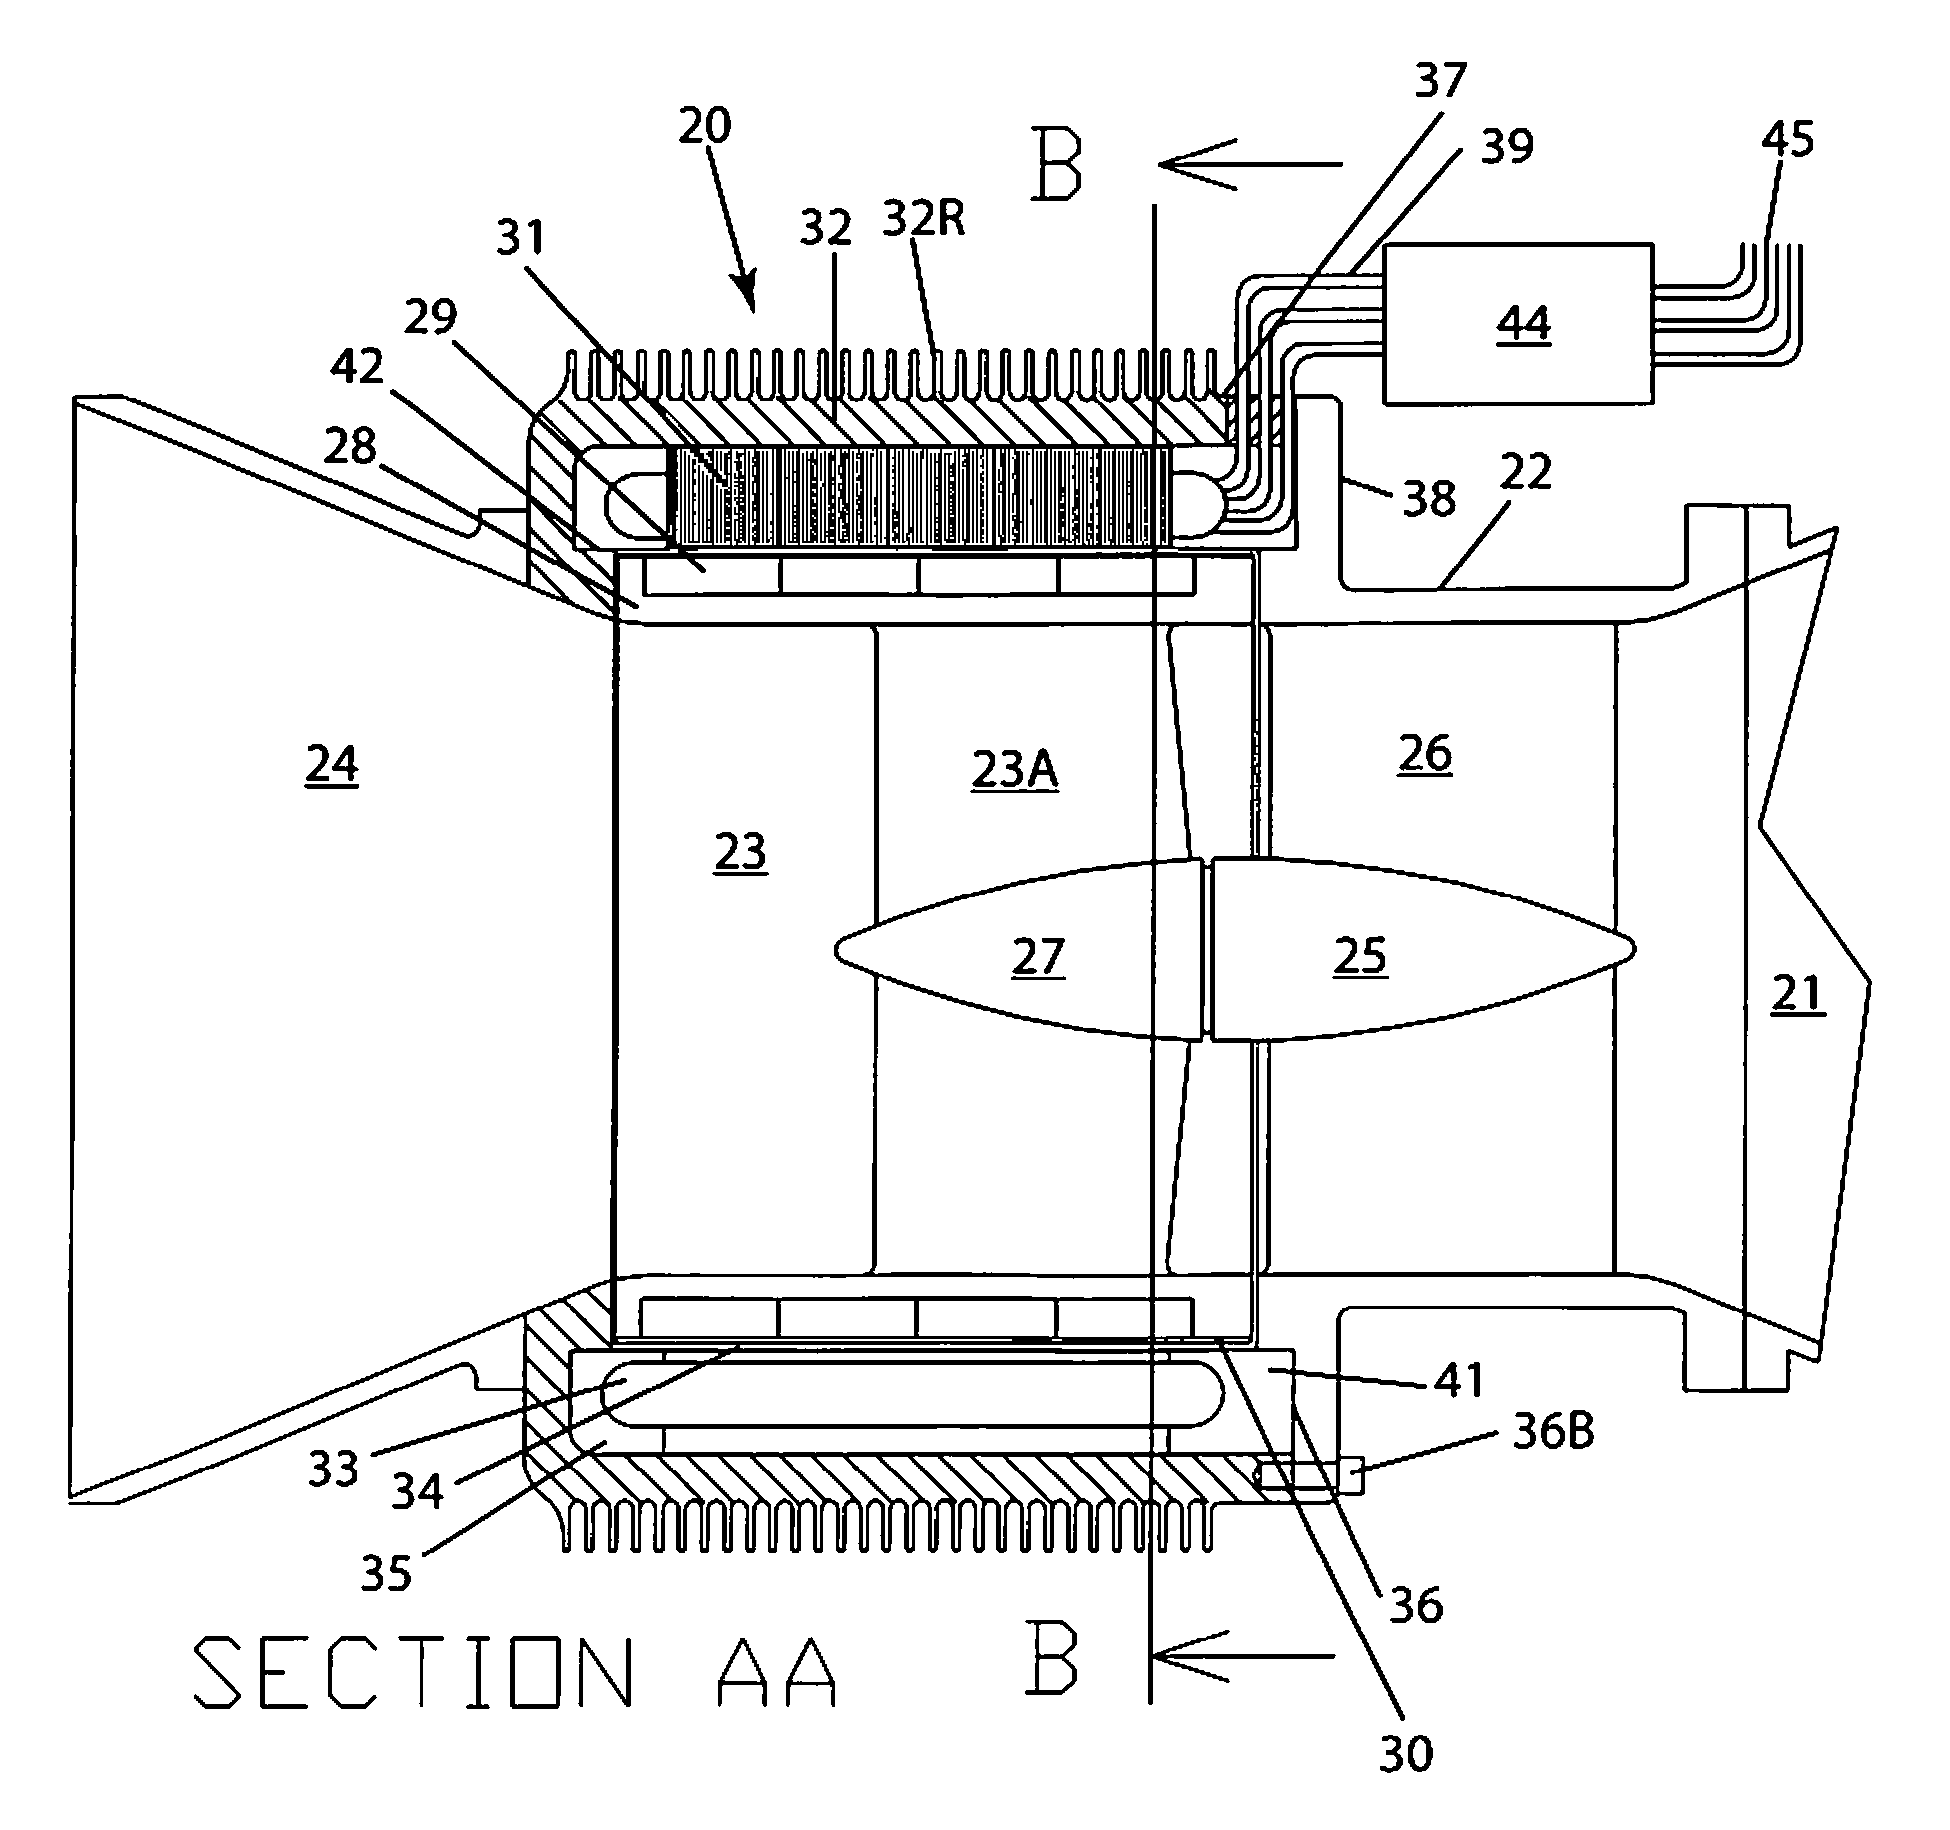 Integrated hydroelectric power-generating system and energy storage device